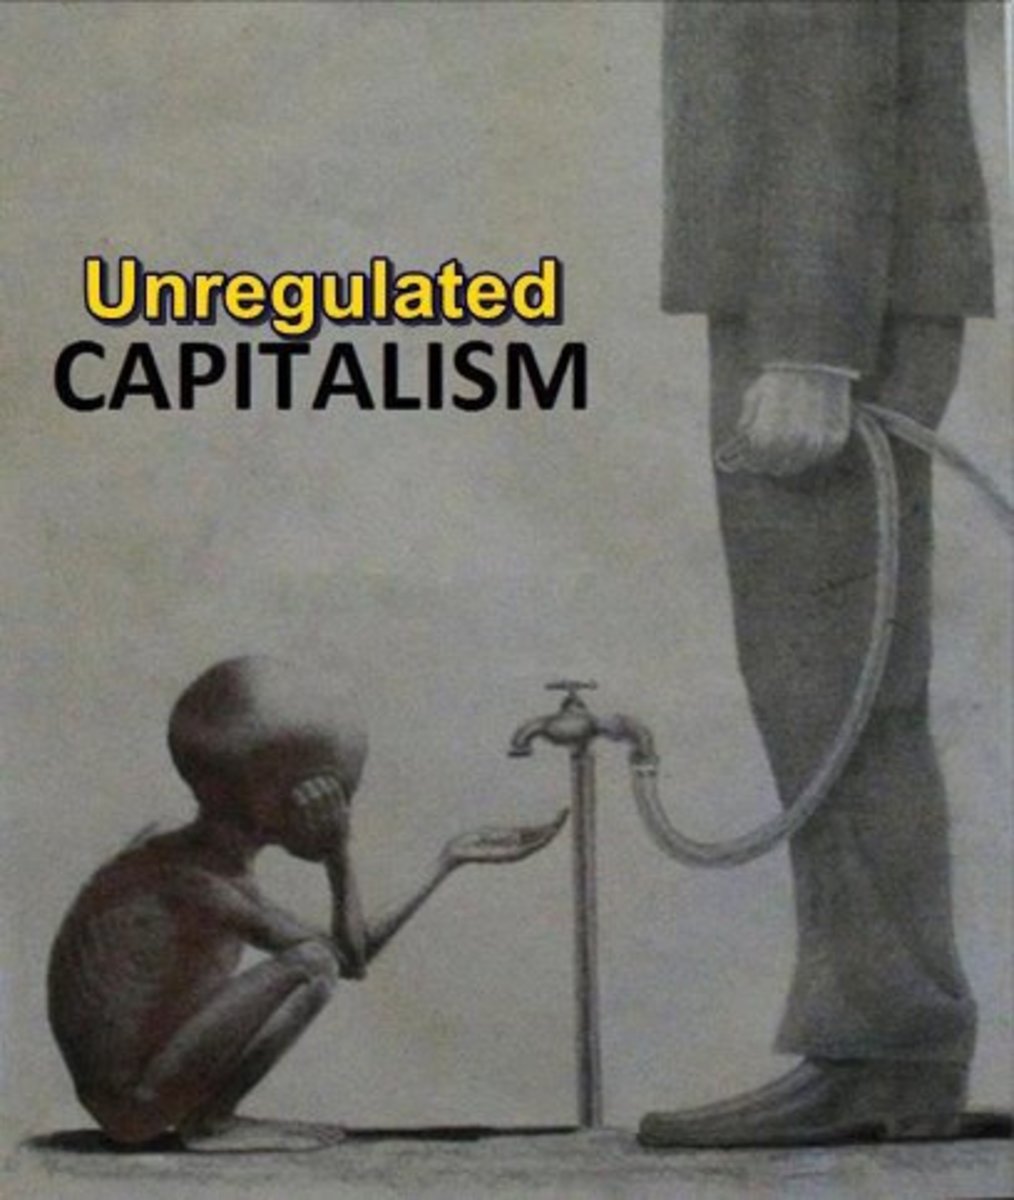 Unfettered Capitalism Leads to Corruption